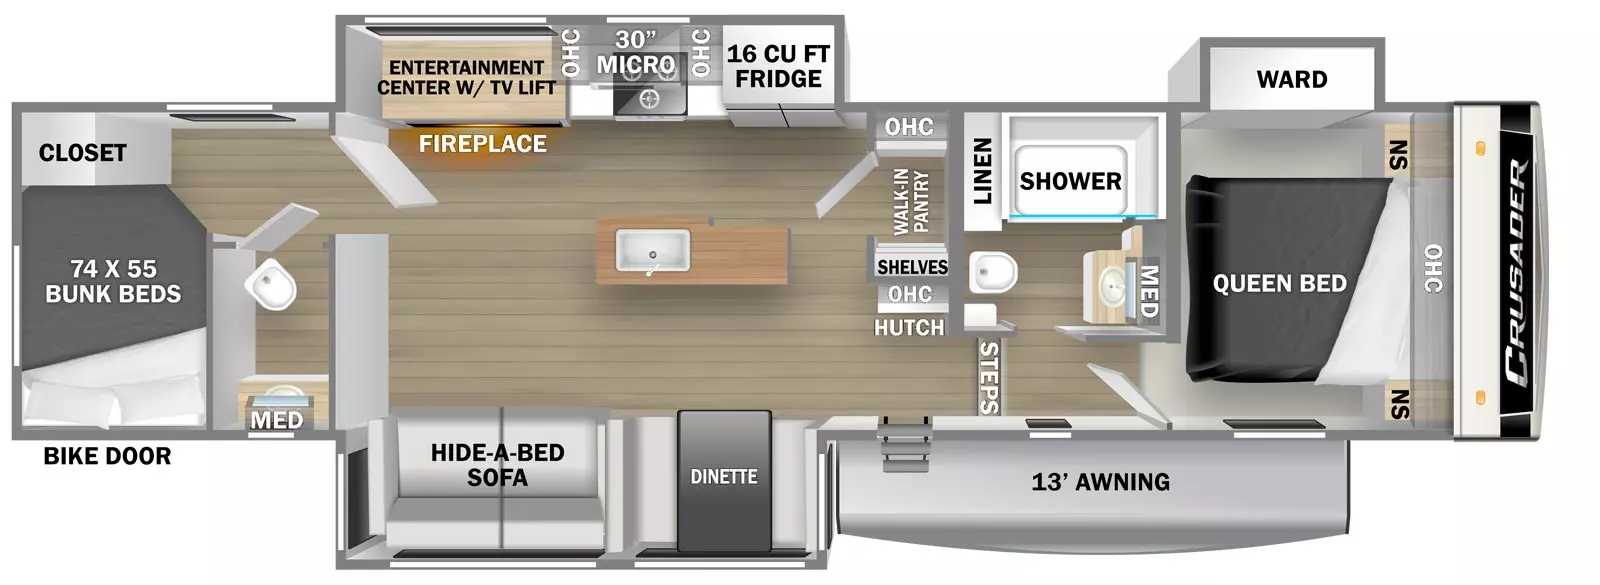 The 333BHT has three slideouts and one entry door. Exterior features a 13 foot awning. Interior layout front to back: front queen bed with overhead cabinets and night stands on each side, and and off-door side wardrobe slideout; off-door side bathroom with linen closet and medicine cabinet; two steps down to the entry door and living area; hutch, overhead cabinet, and walk-in pantry with shelves, overhead cabinet and counter along inner wall; off-door side slideout with 16 cubic foot refrigerator, overhead cabinets, microwave, cooktop, entertainment center with TV lift and fireplace below; door side slideout with table, chairs and storage ottoman, and theater seating; kitchen island with sink; rear bunk area with door side half bathroom, bunk beds and closet. Optional free-standing dinette available in place of table, chairs and storage ottoman.